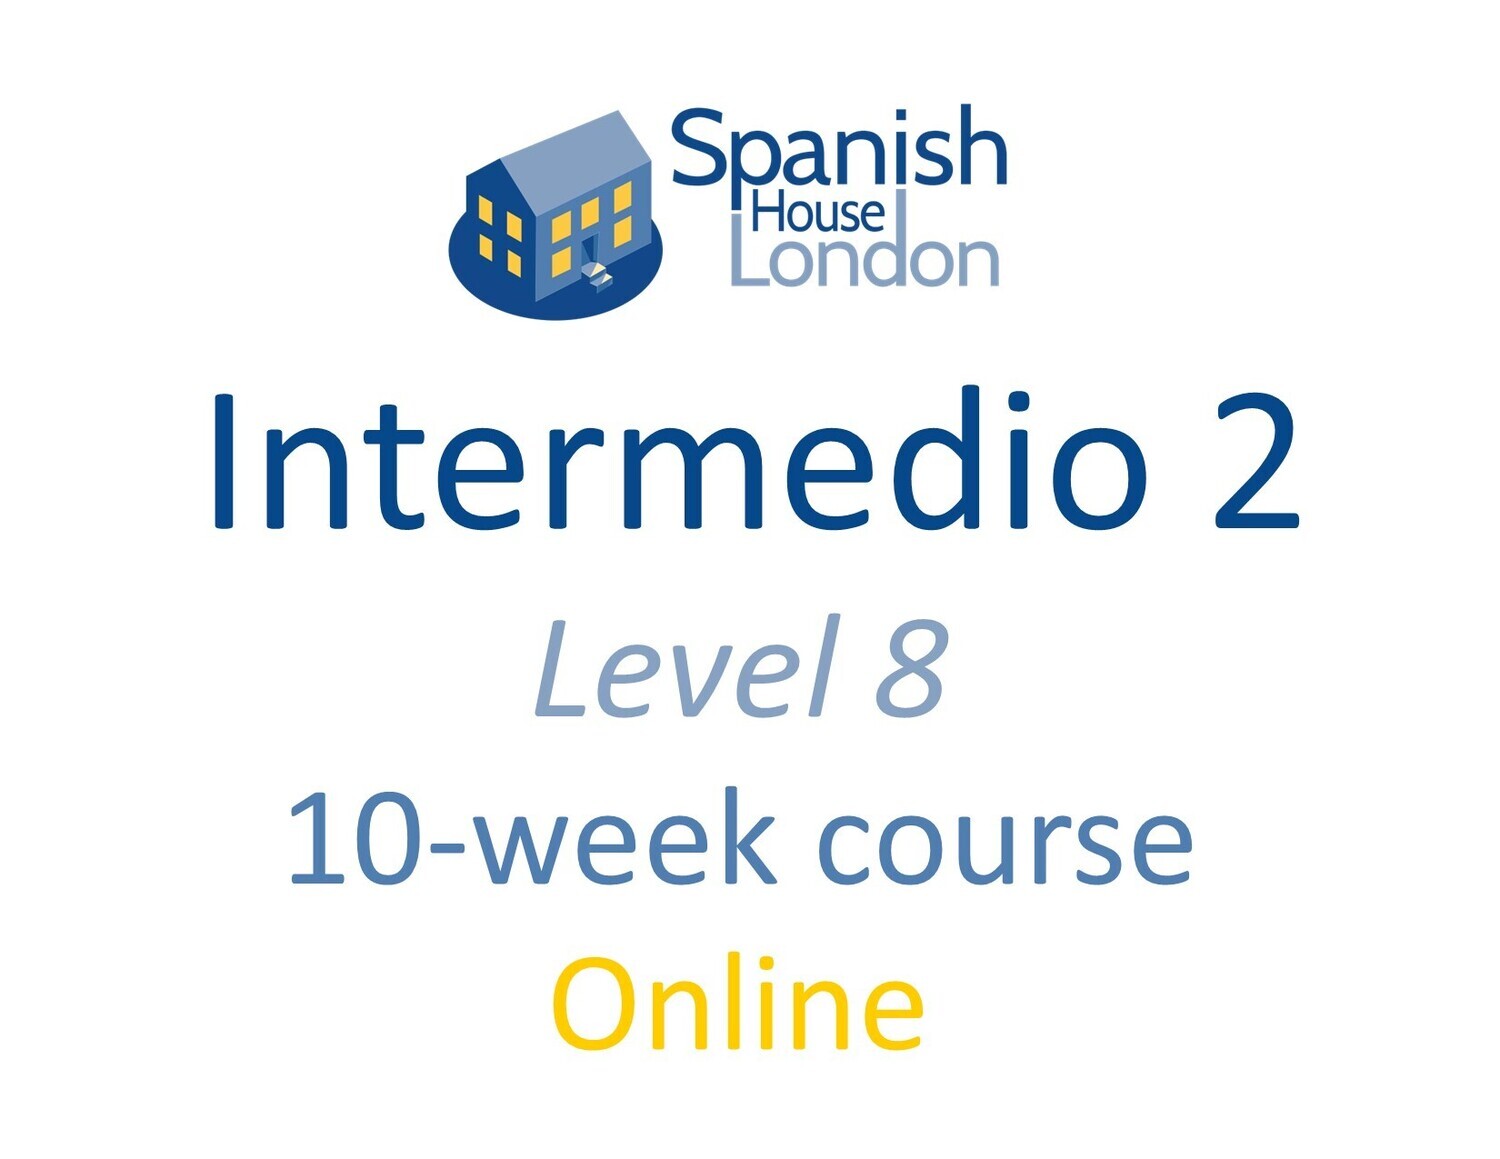 Intermedio 2 Course starting on 11th September at 6pm Online